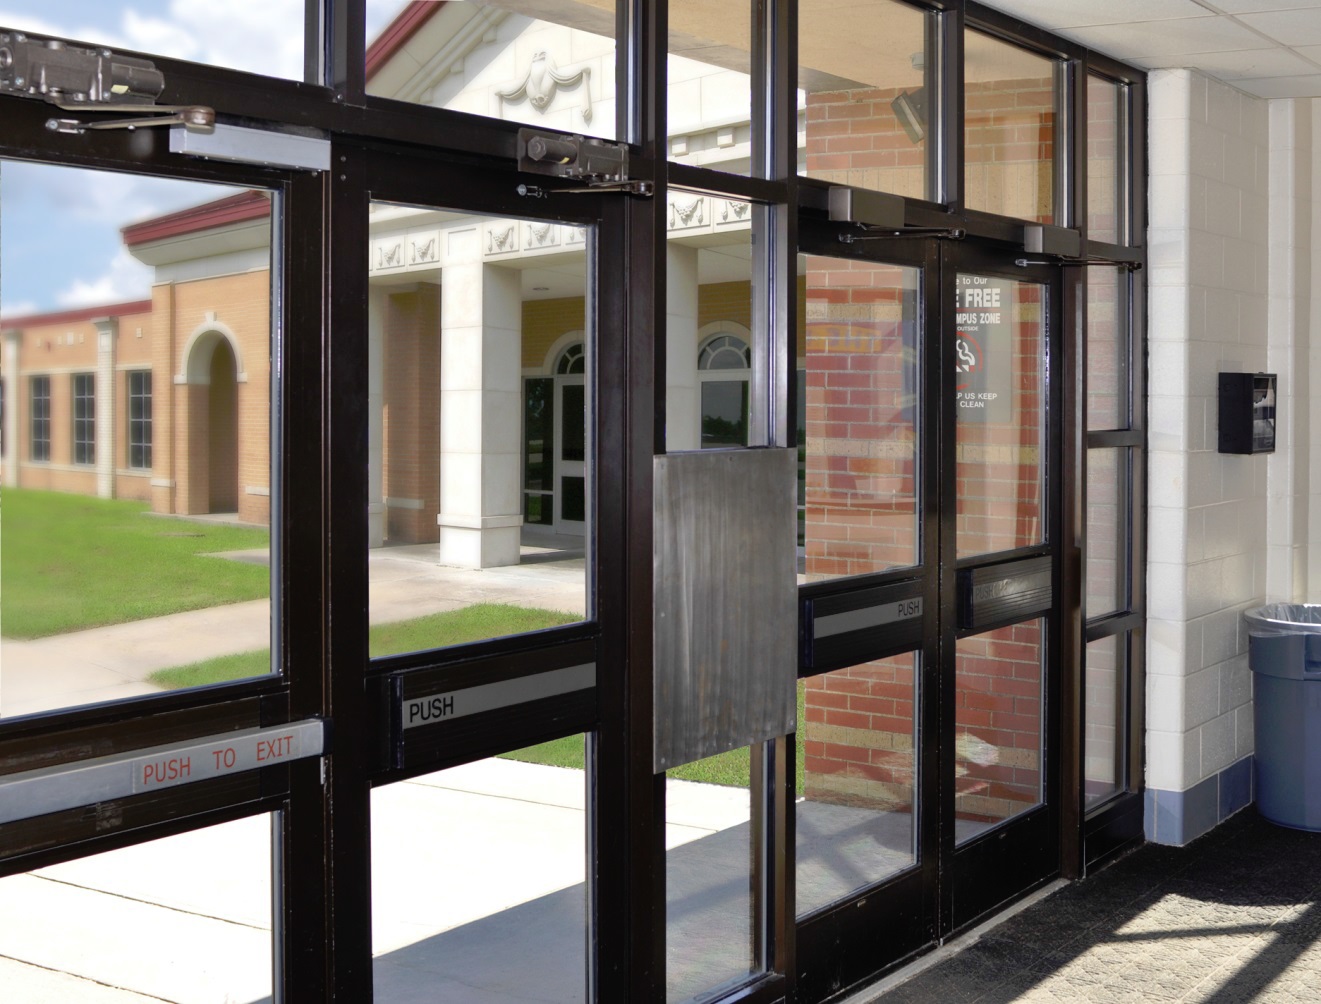 School safety is now a common consideration for educational facilities.